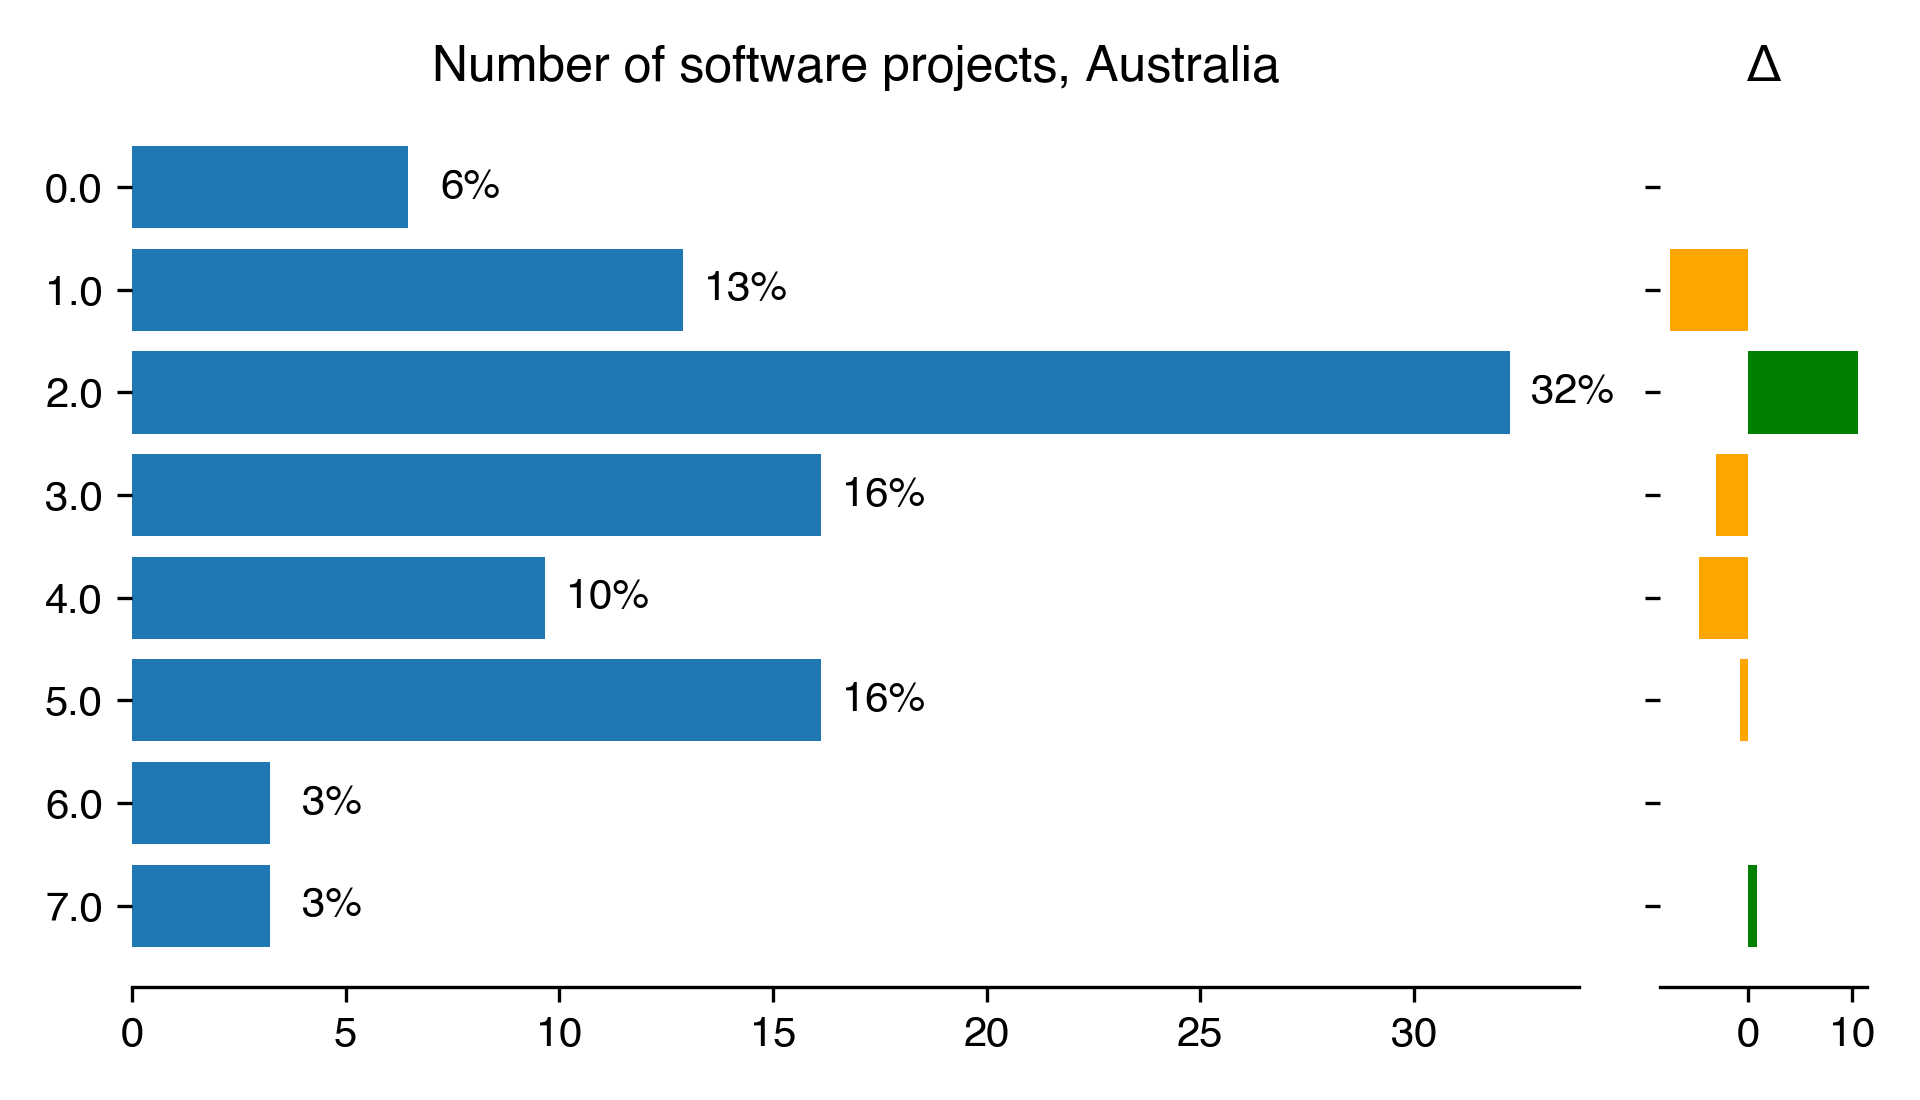 number-of-software-projects